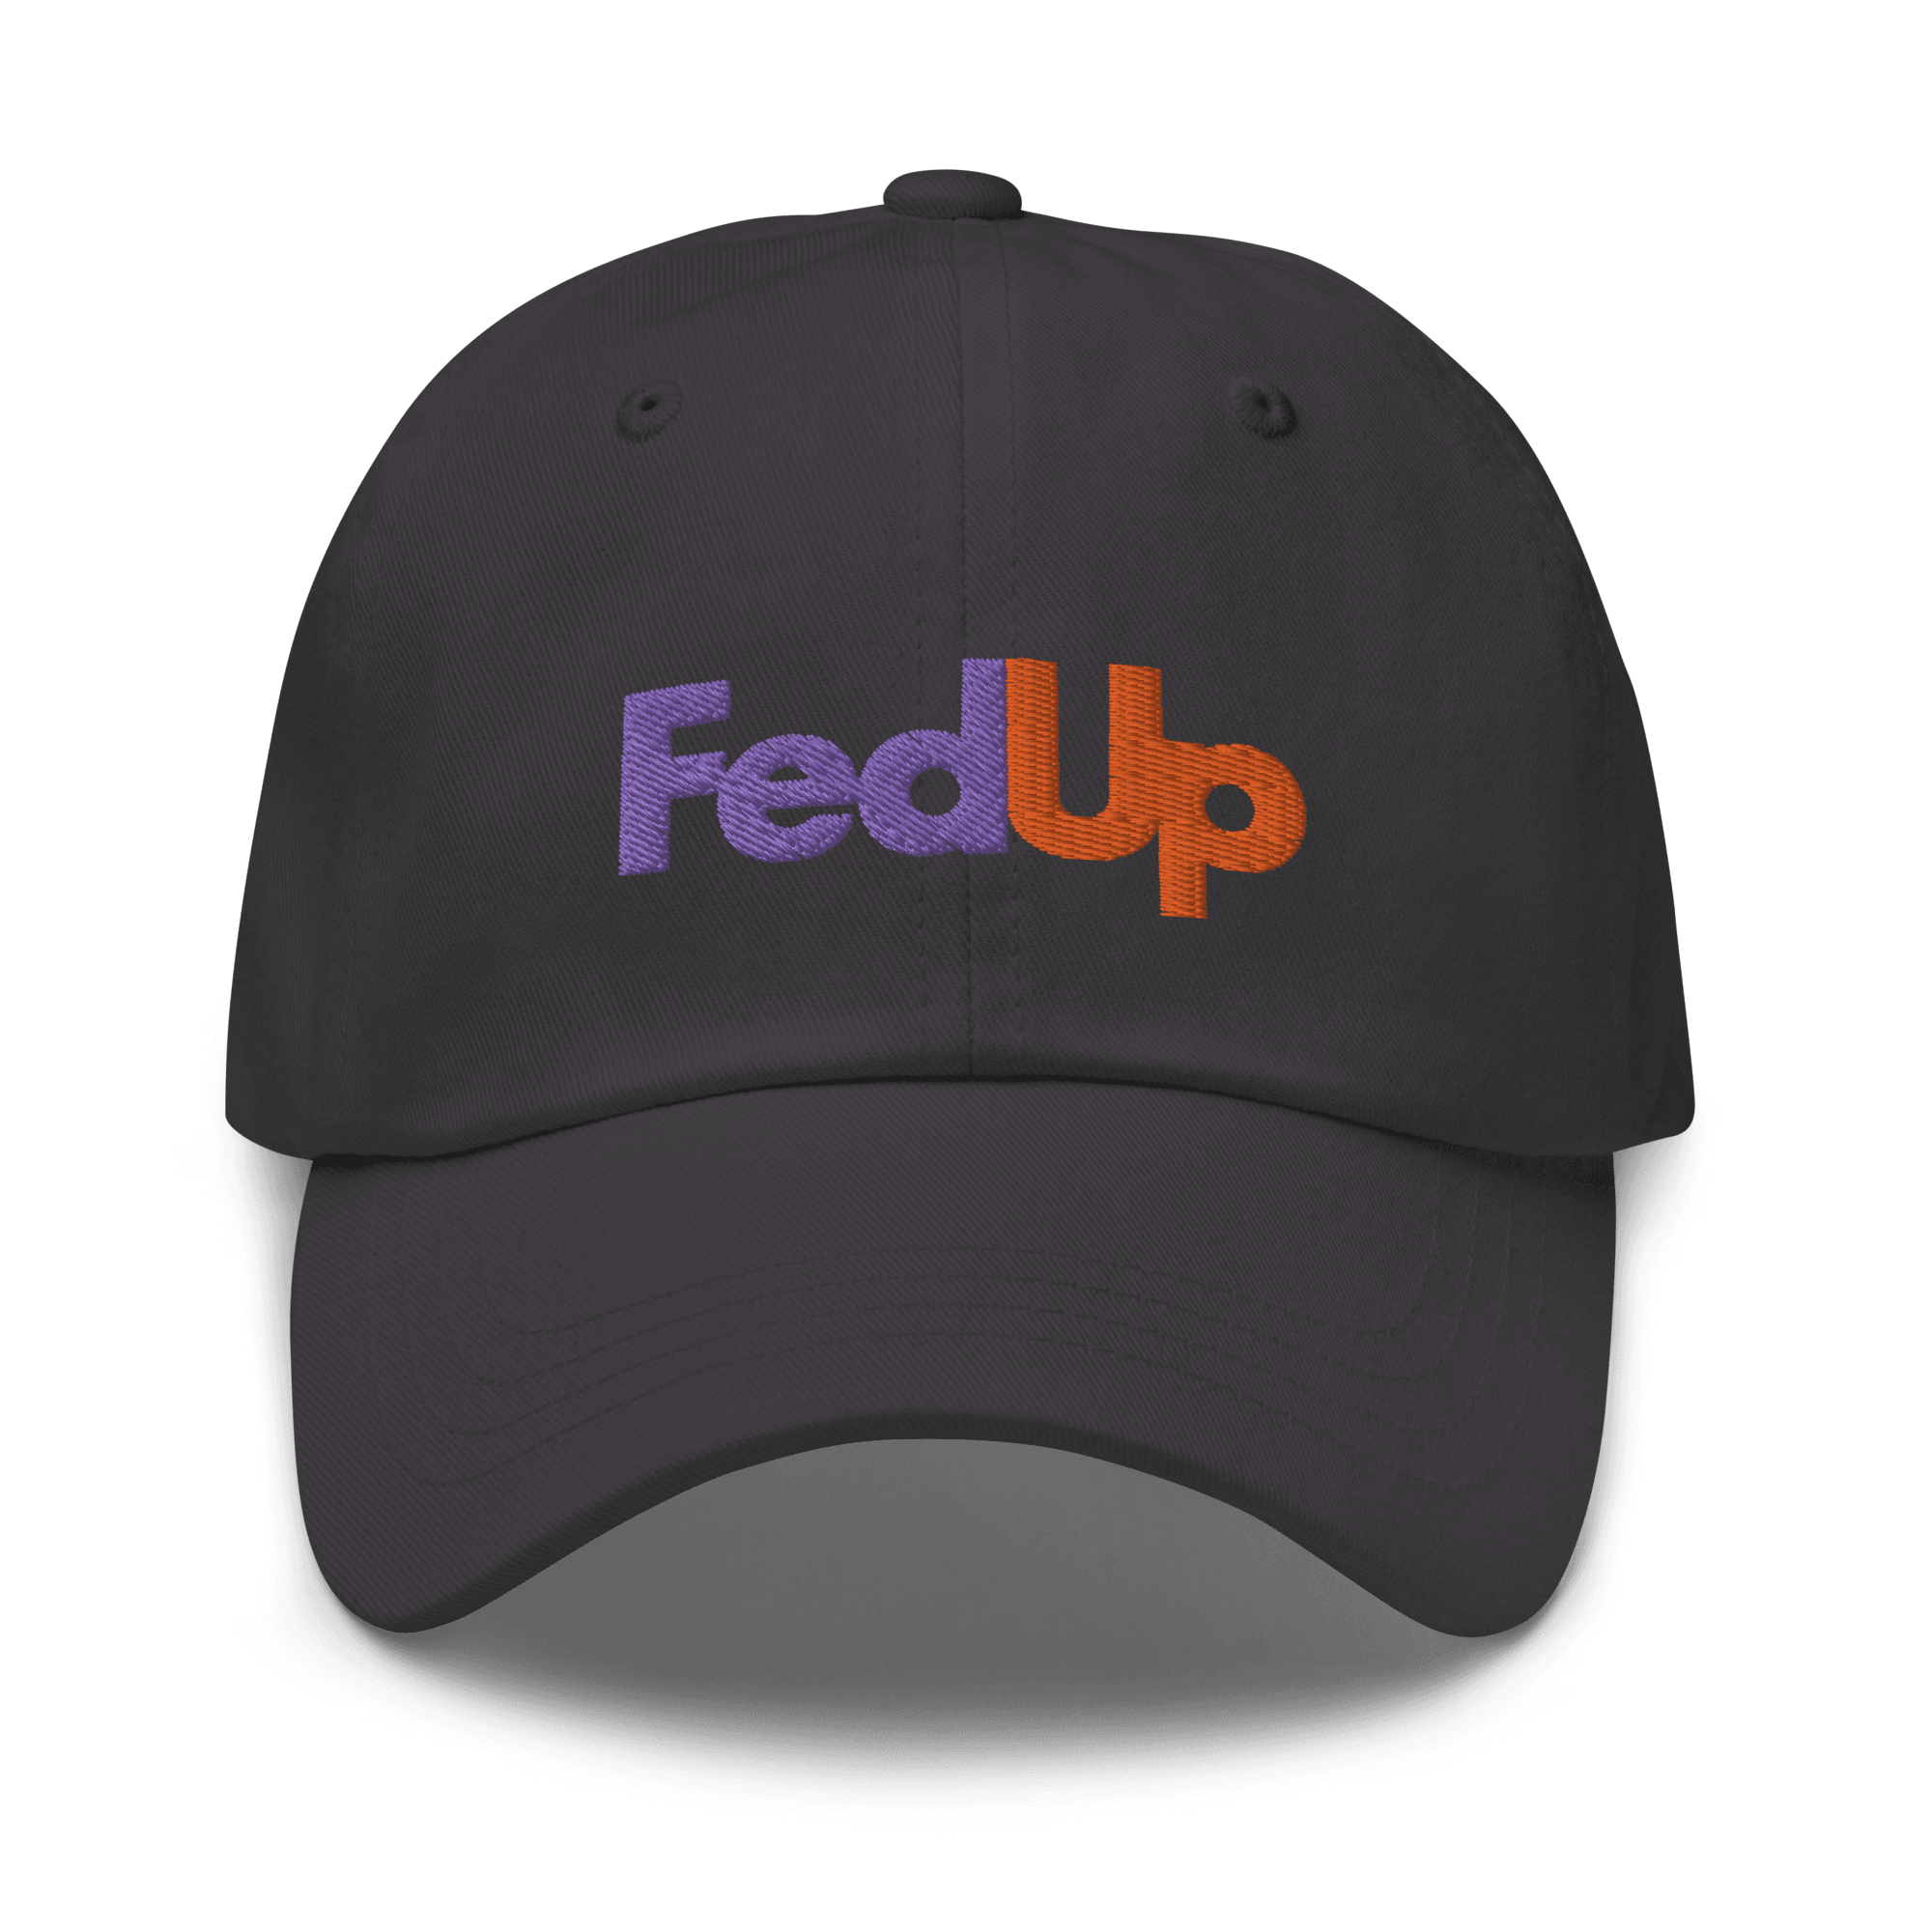 FedUp Embroidered Dad Hat - Polychrome Goods 🍊